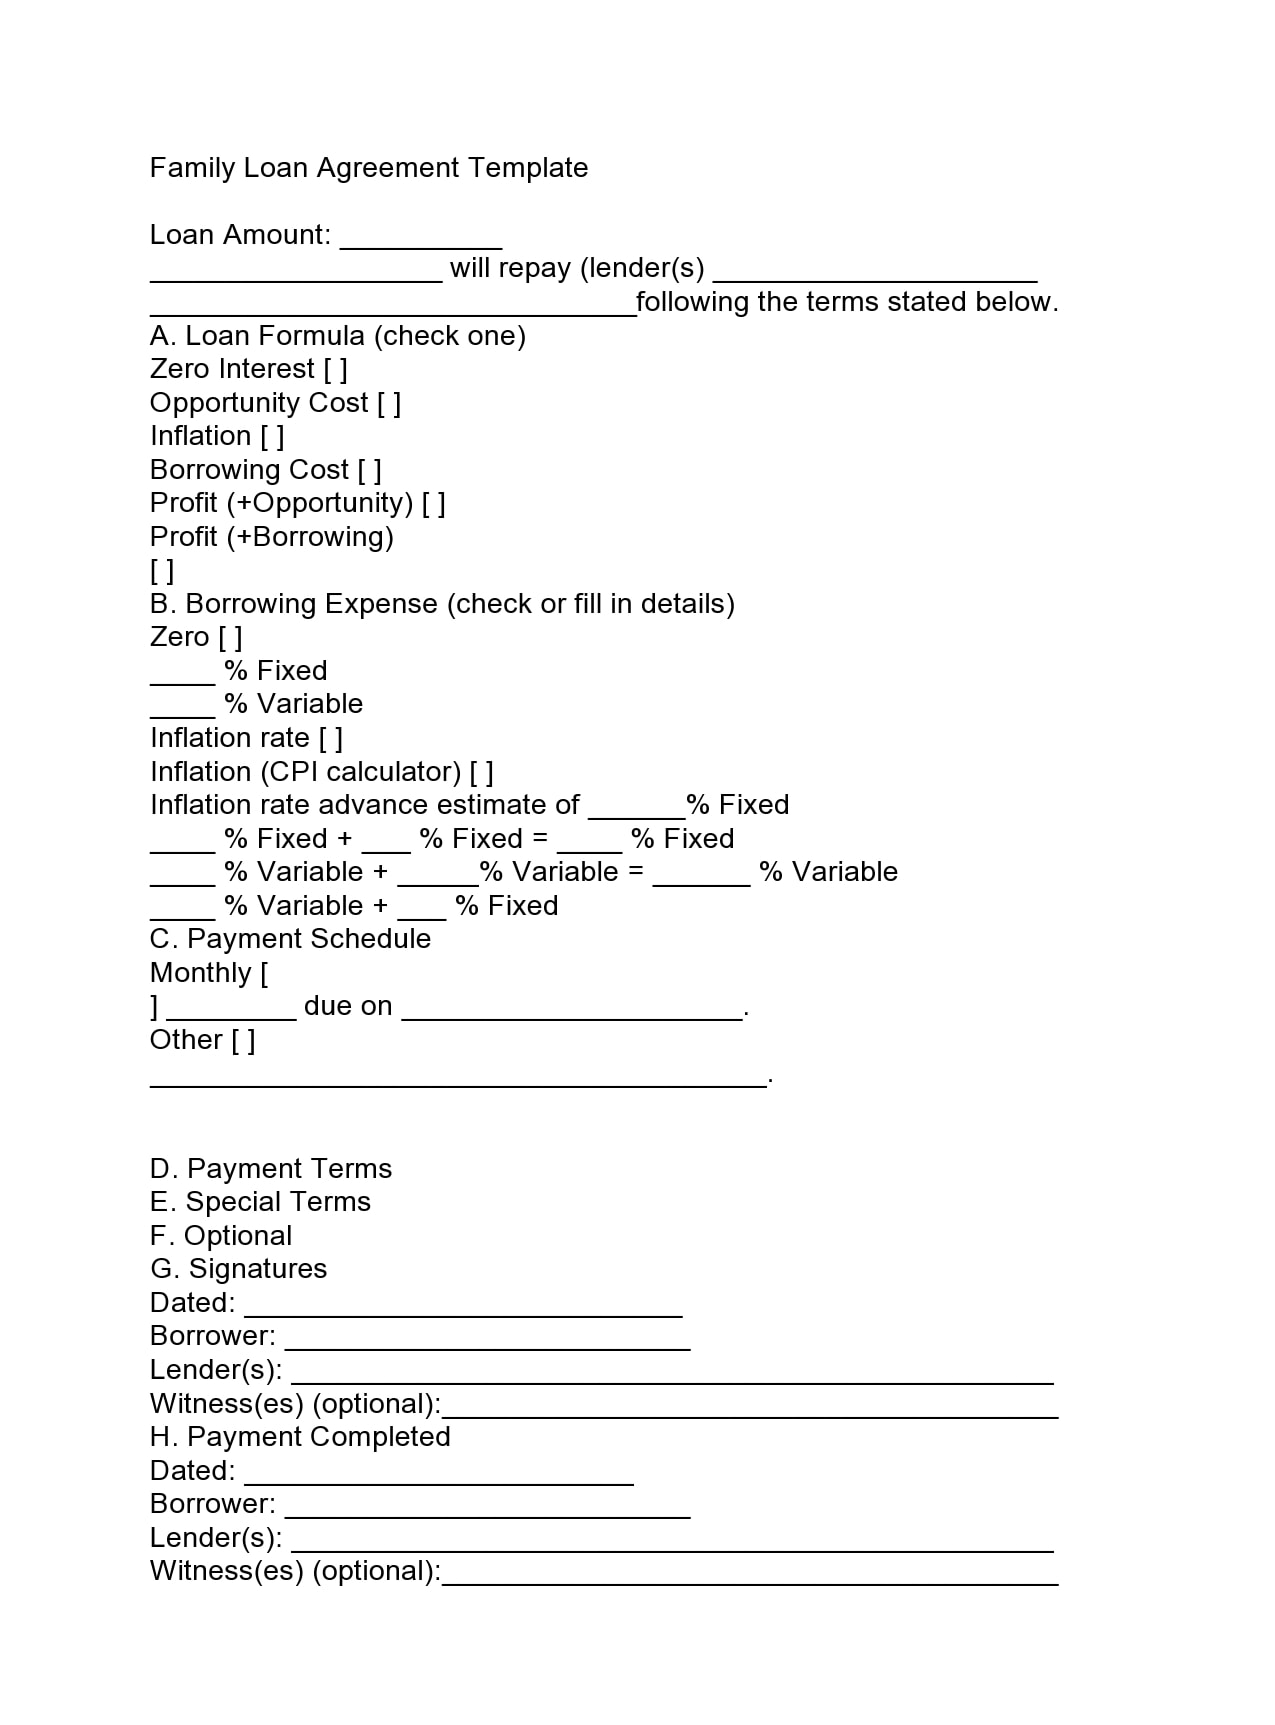 Printable Family Loan Agreement Template